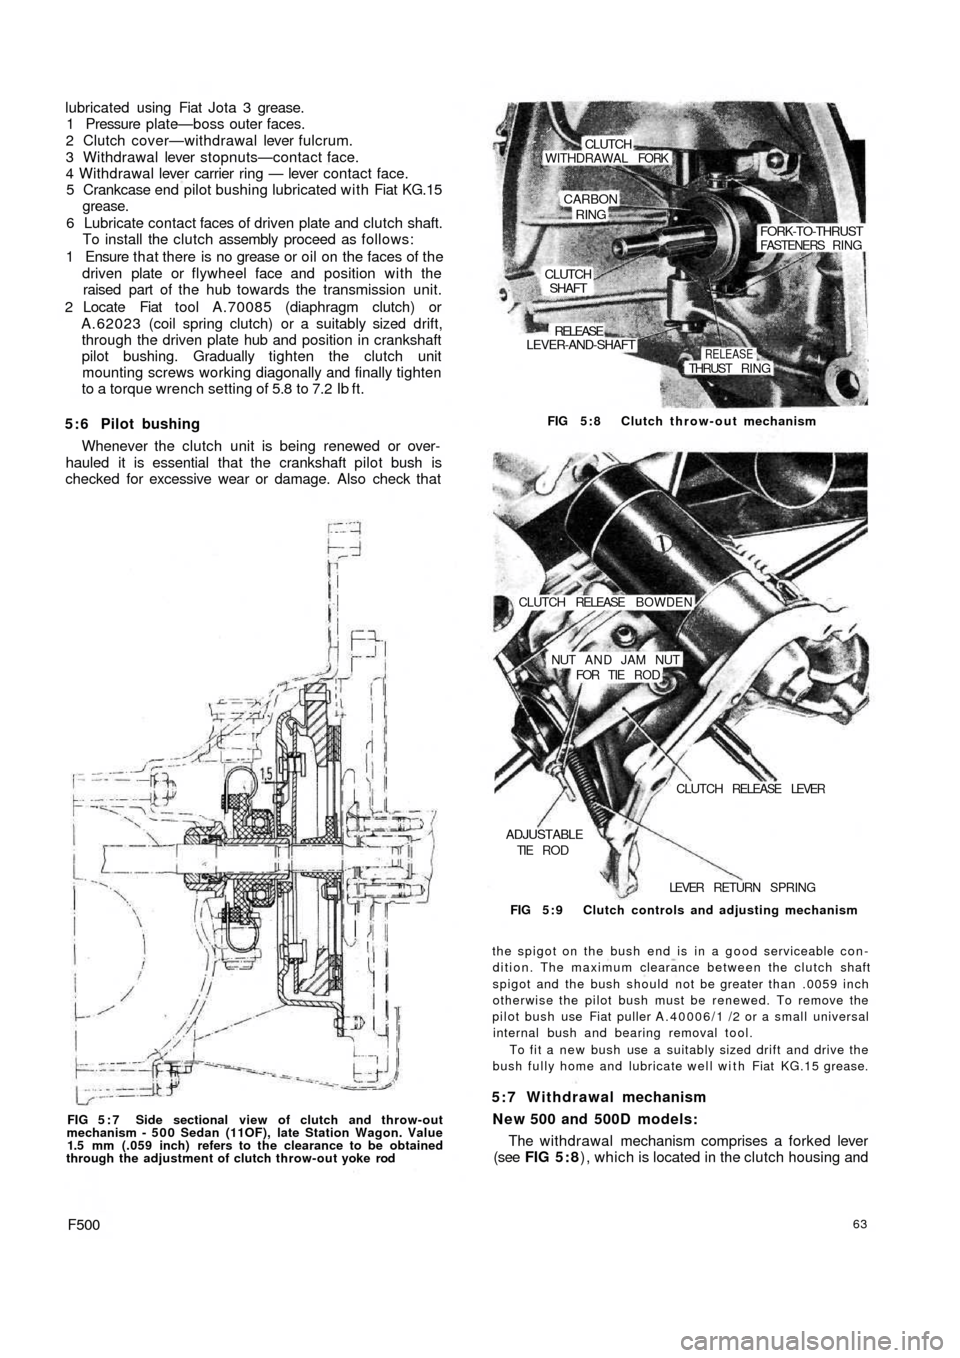 FIAT 500 1959 1.G Workshop Manual lubricated using Fiat Jota 3 grease.
1 Pressure plate—boss outer faces.
2 Clutch cover—withdrawal lever fulcrum.
3 Withdrawal lever stopnuts—contact face.
4 Withdrawal lever carrier ring — lev